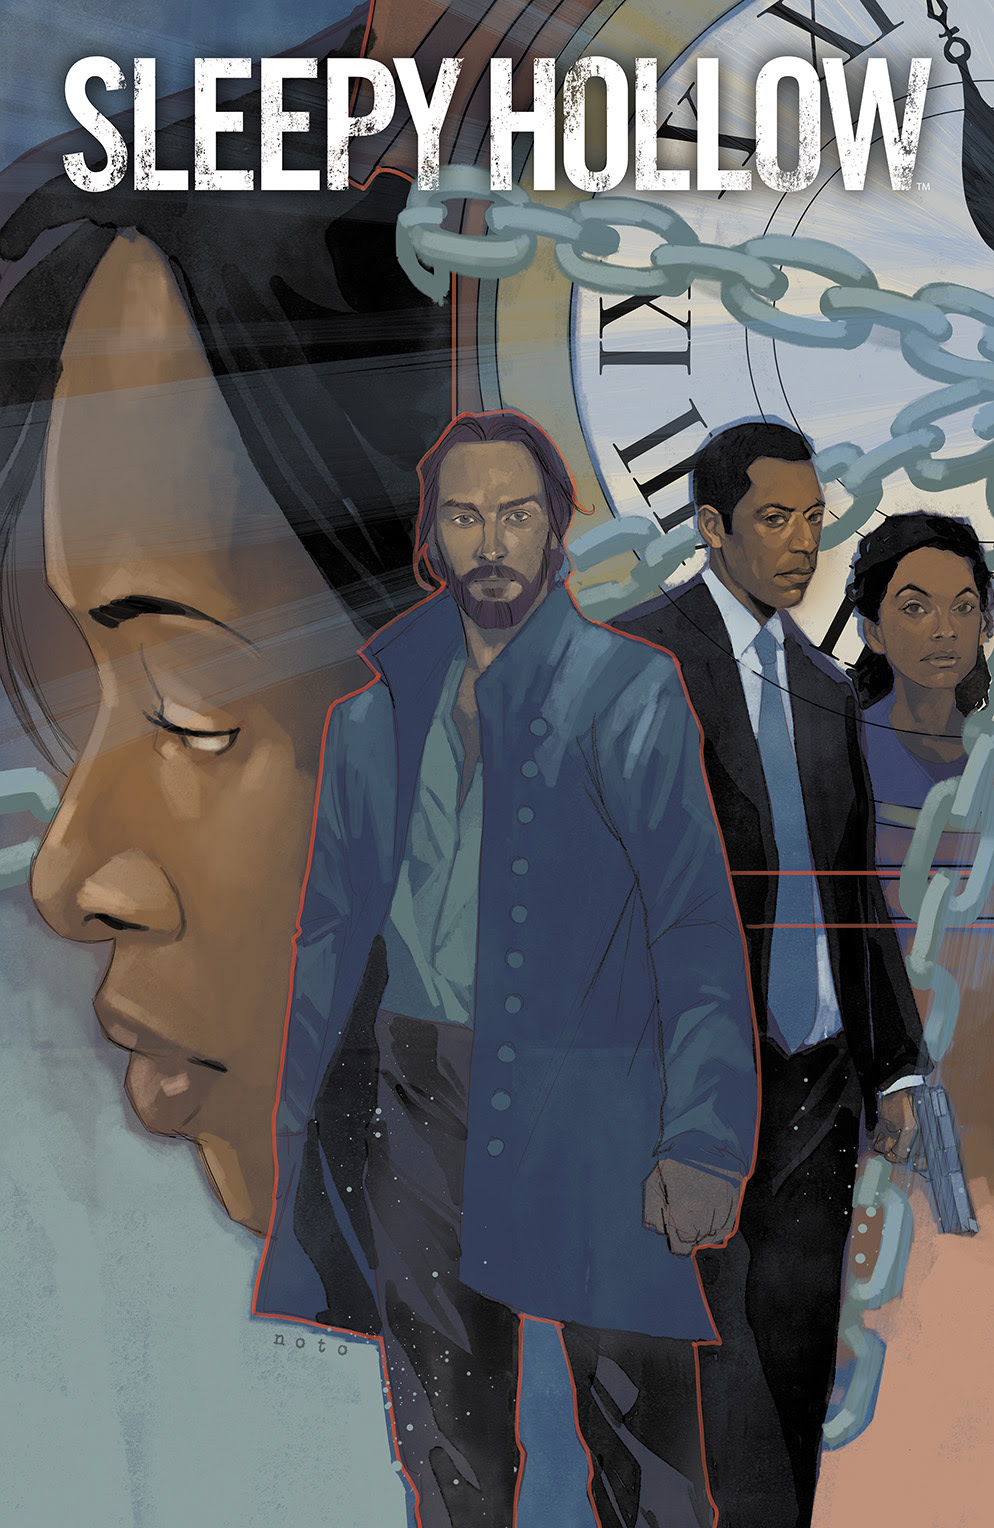 SLEEPY HOLLOW #3 Cover A by Phil Noto